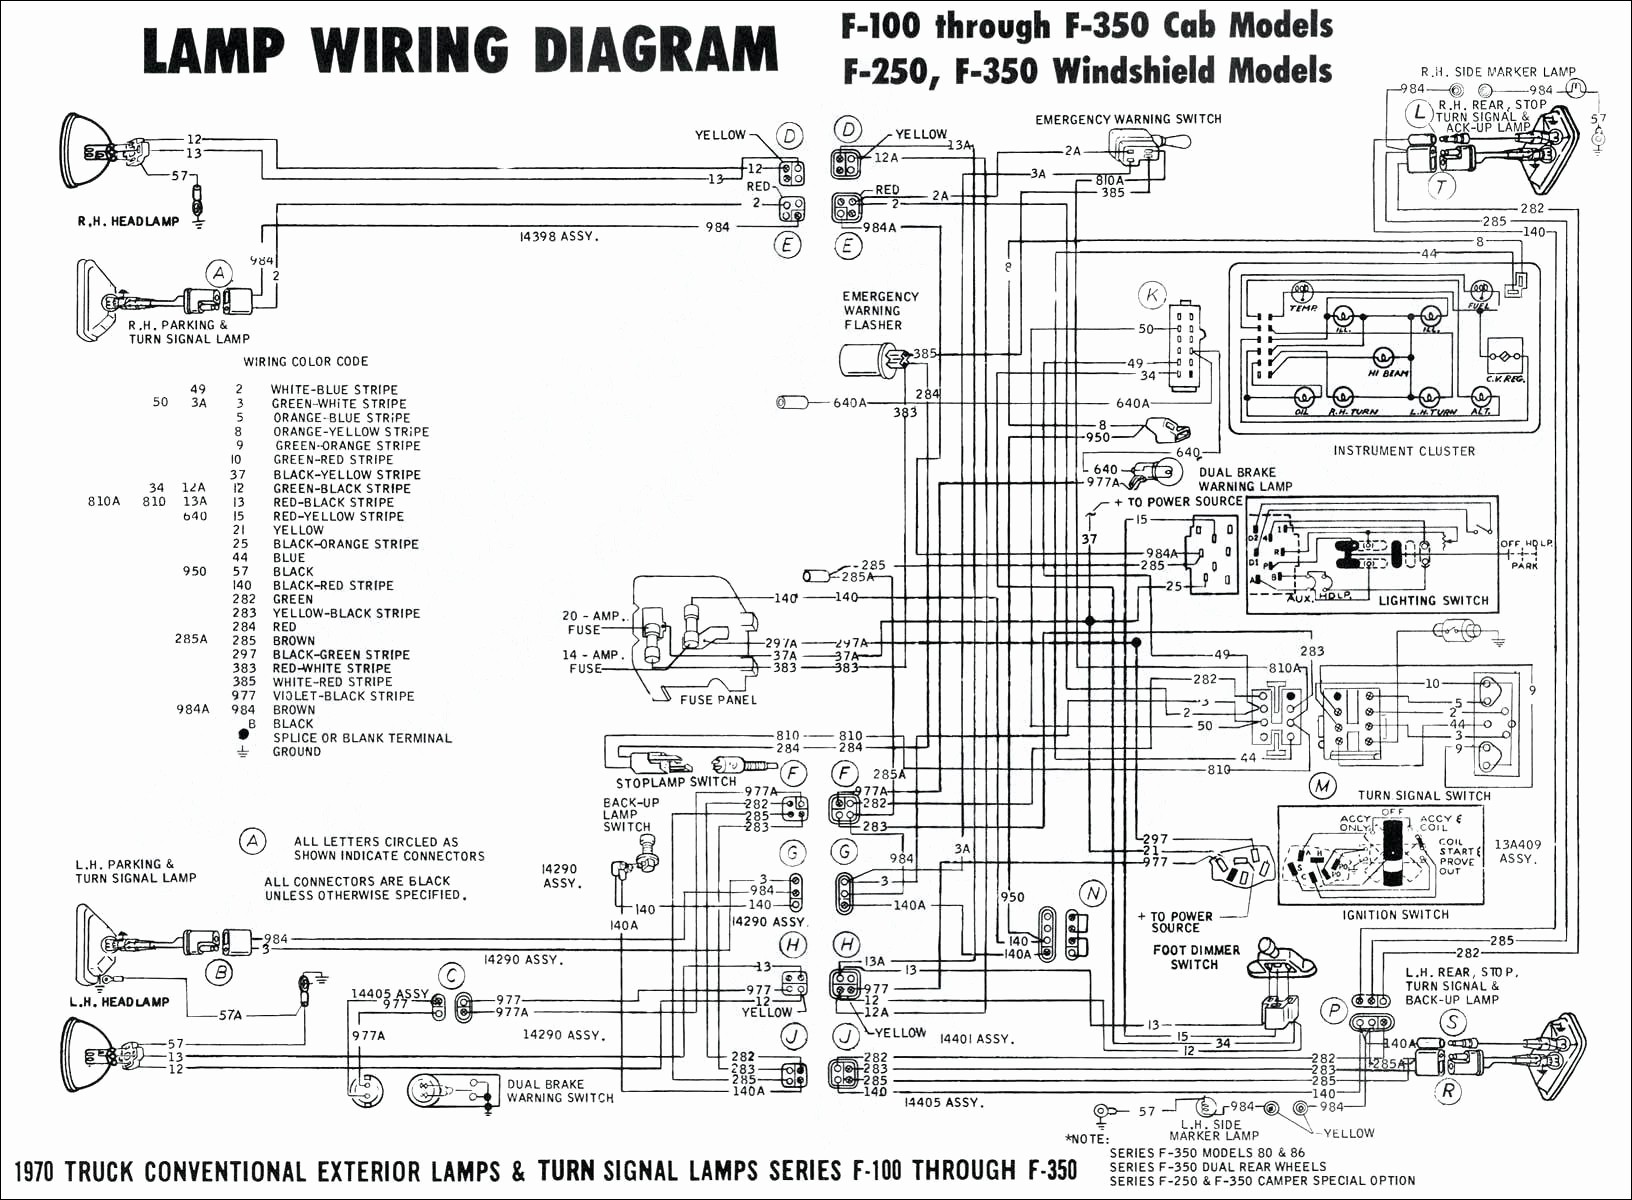 Briggs and Stratton Coil Wiring Diagram Lovely Simple Trailer Wiring Diagram Picture Briggs and Stratton